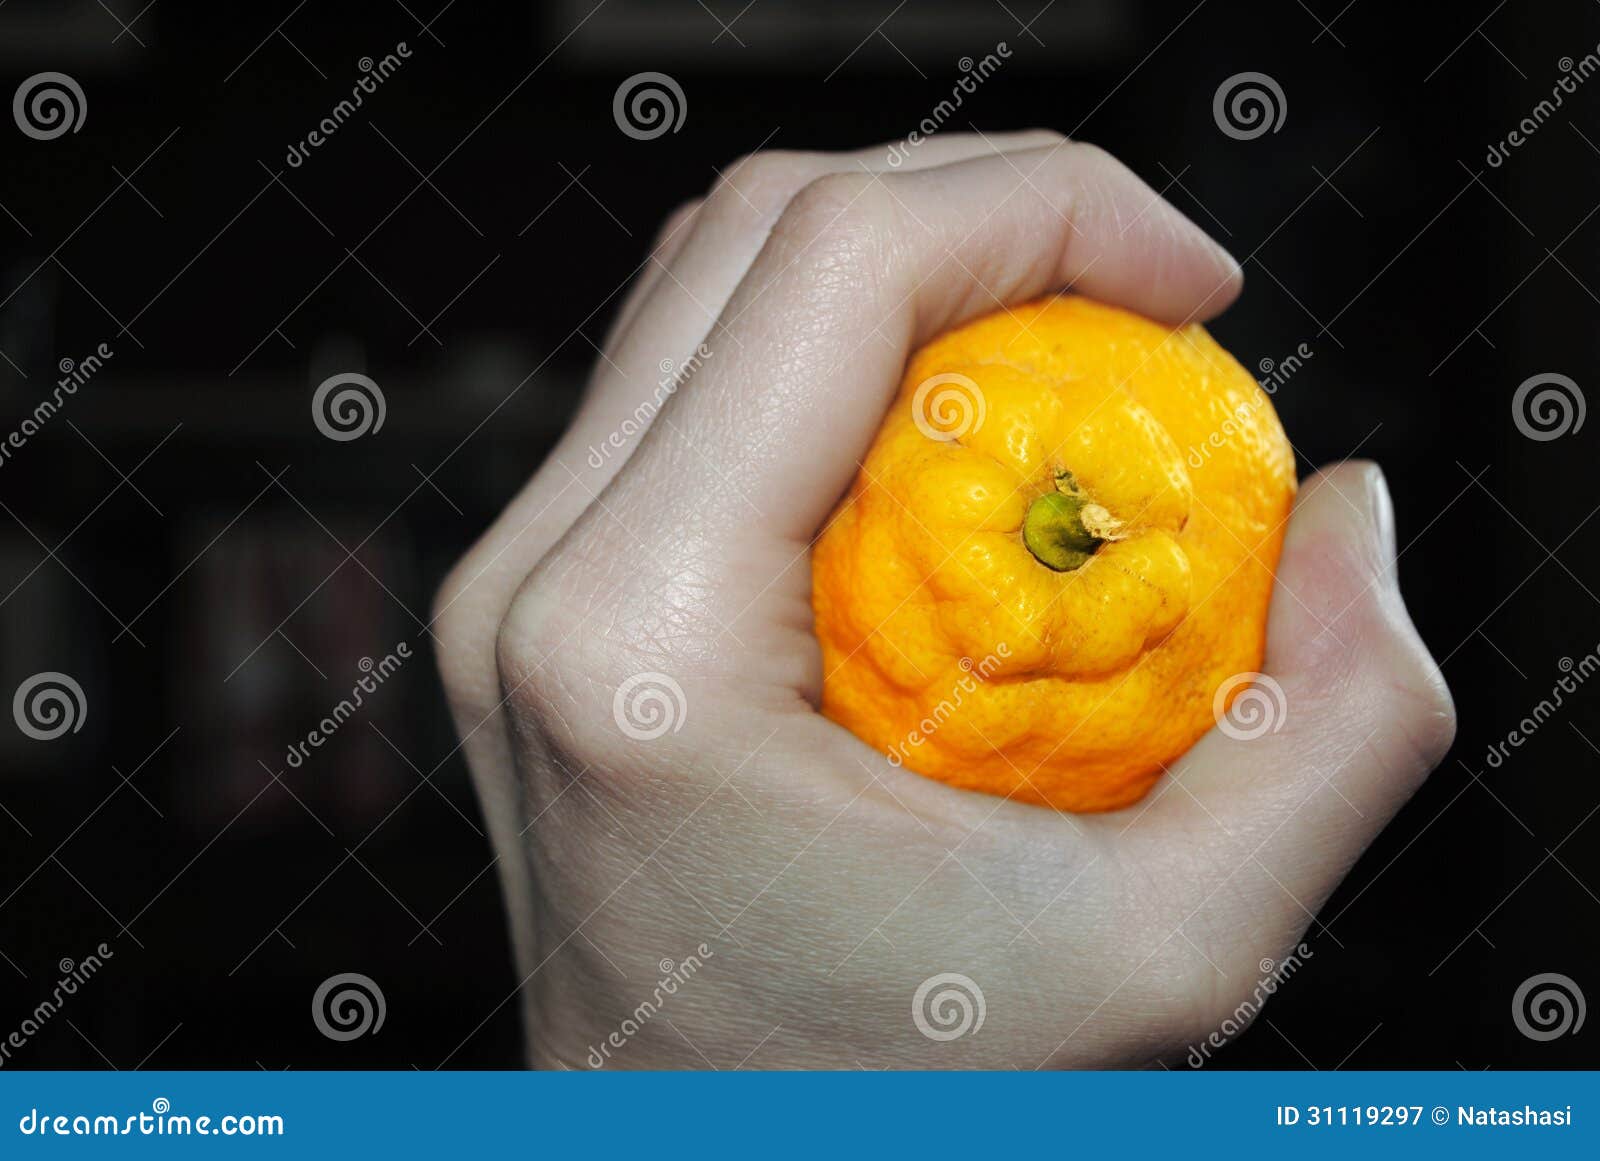 the bright lemon squeezed in a colourless hand